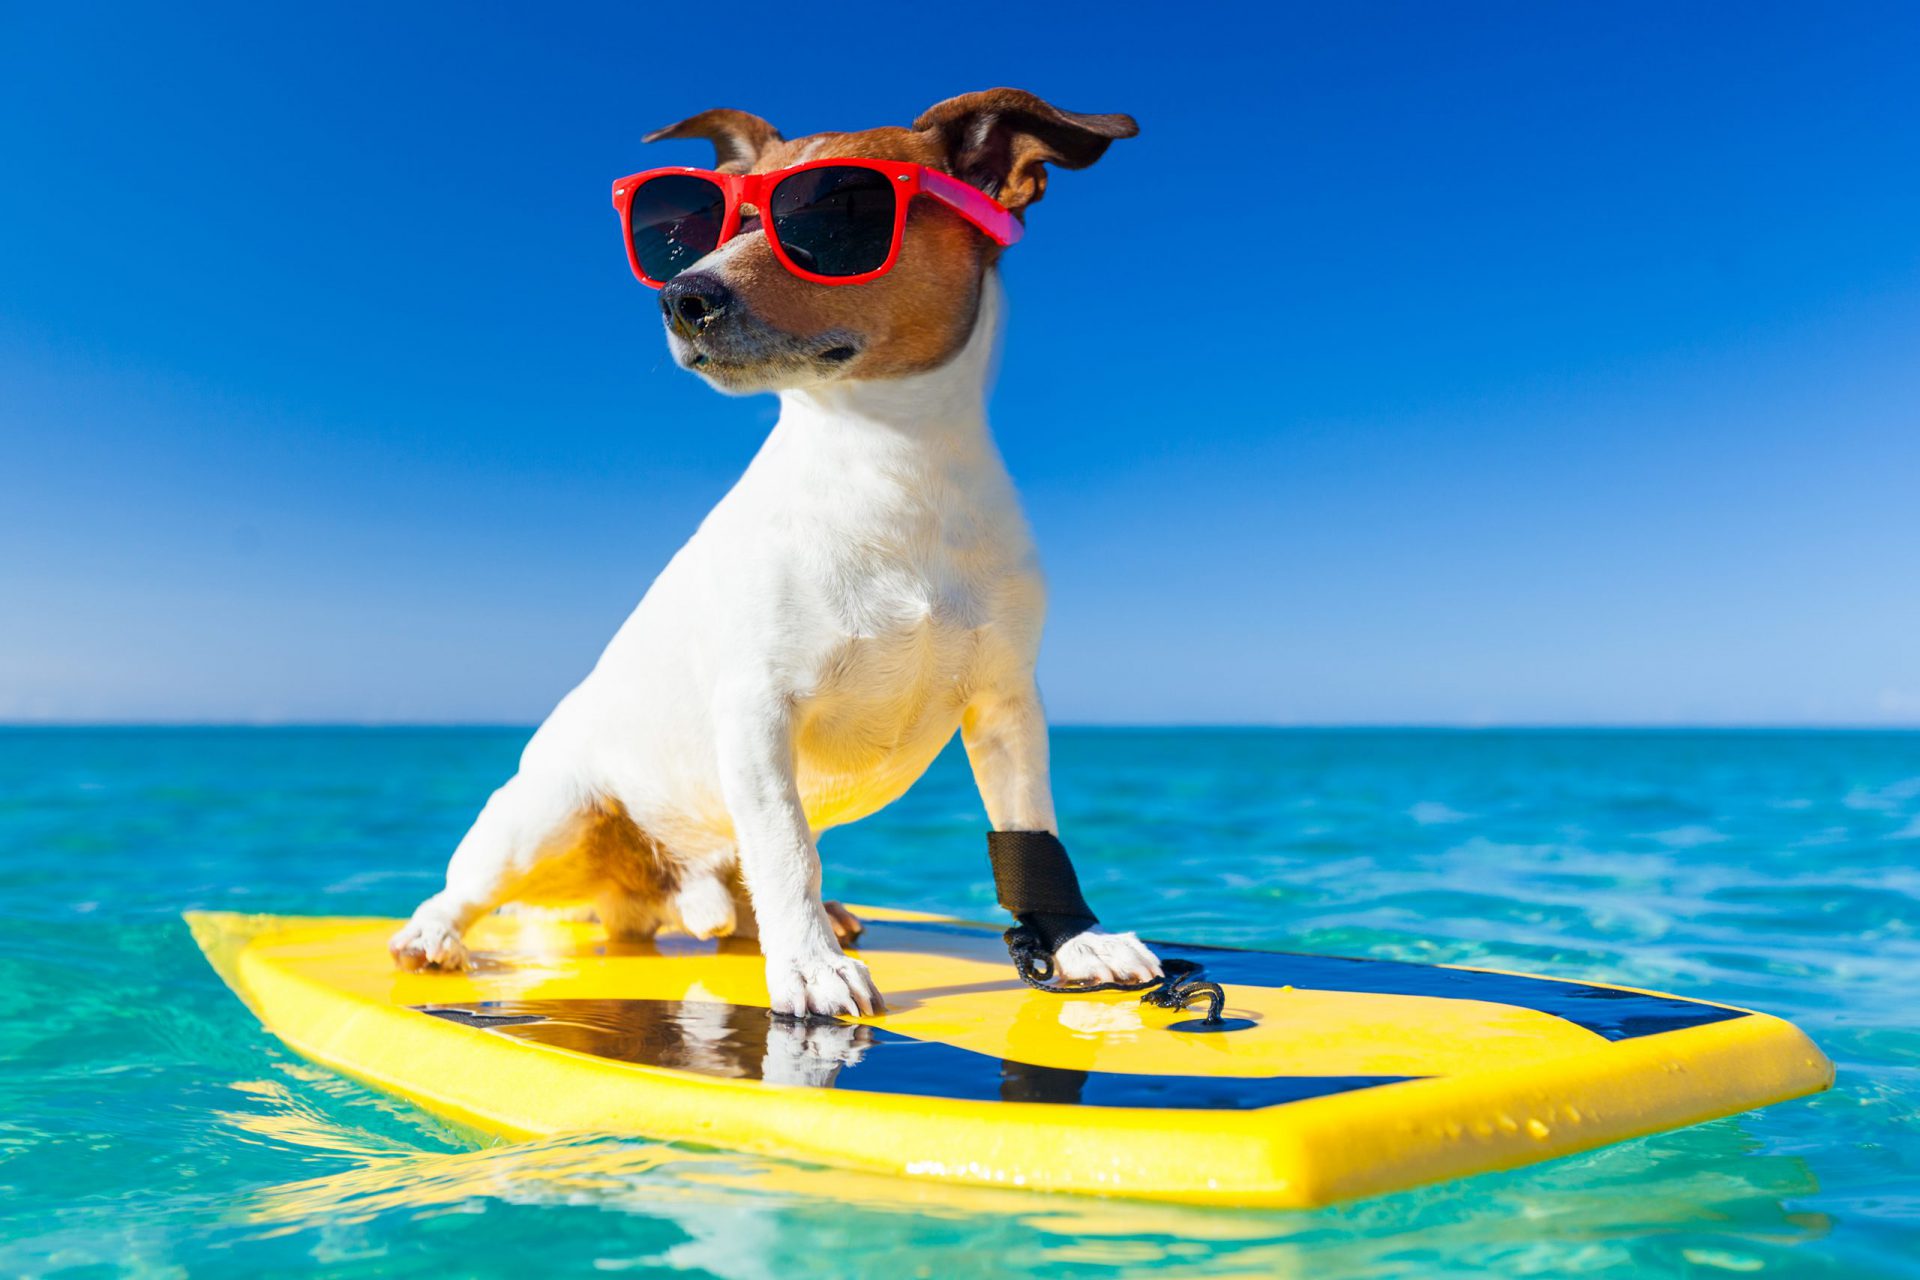 jack russe dog surfing on a surfboard wearing sunglasses  at the ocean shore, very cool